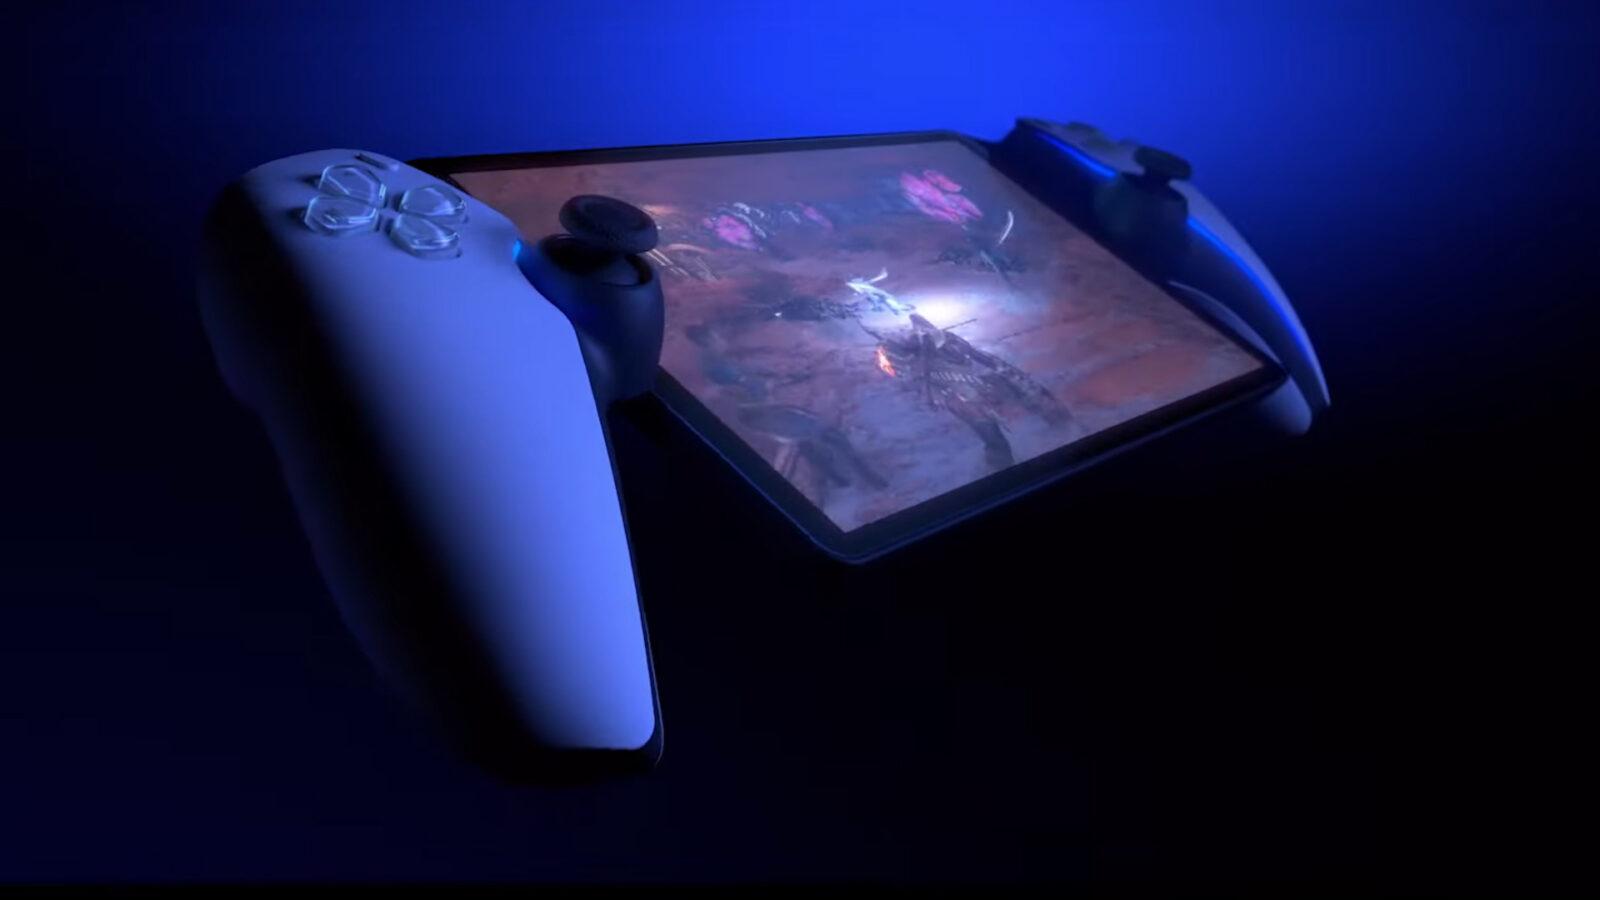 Dedicated device for PlayStation 5, codenamed 